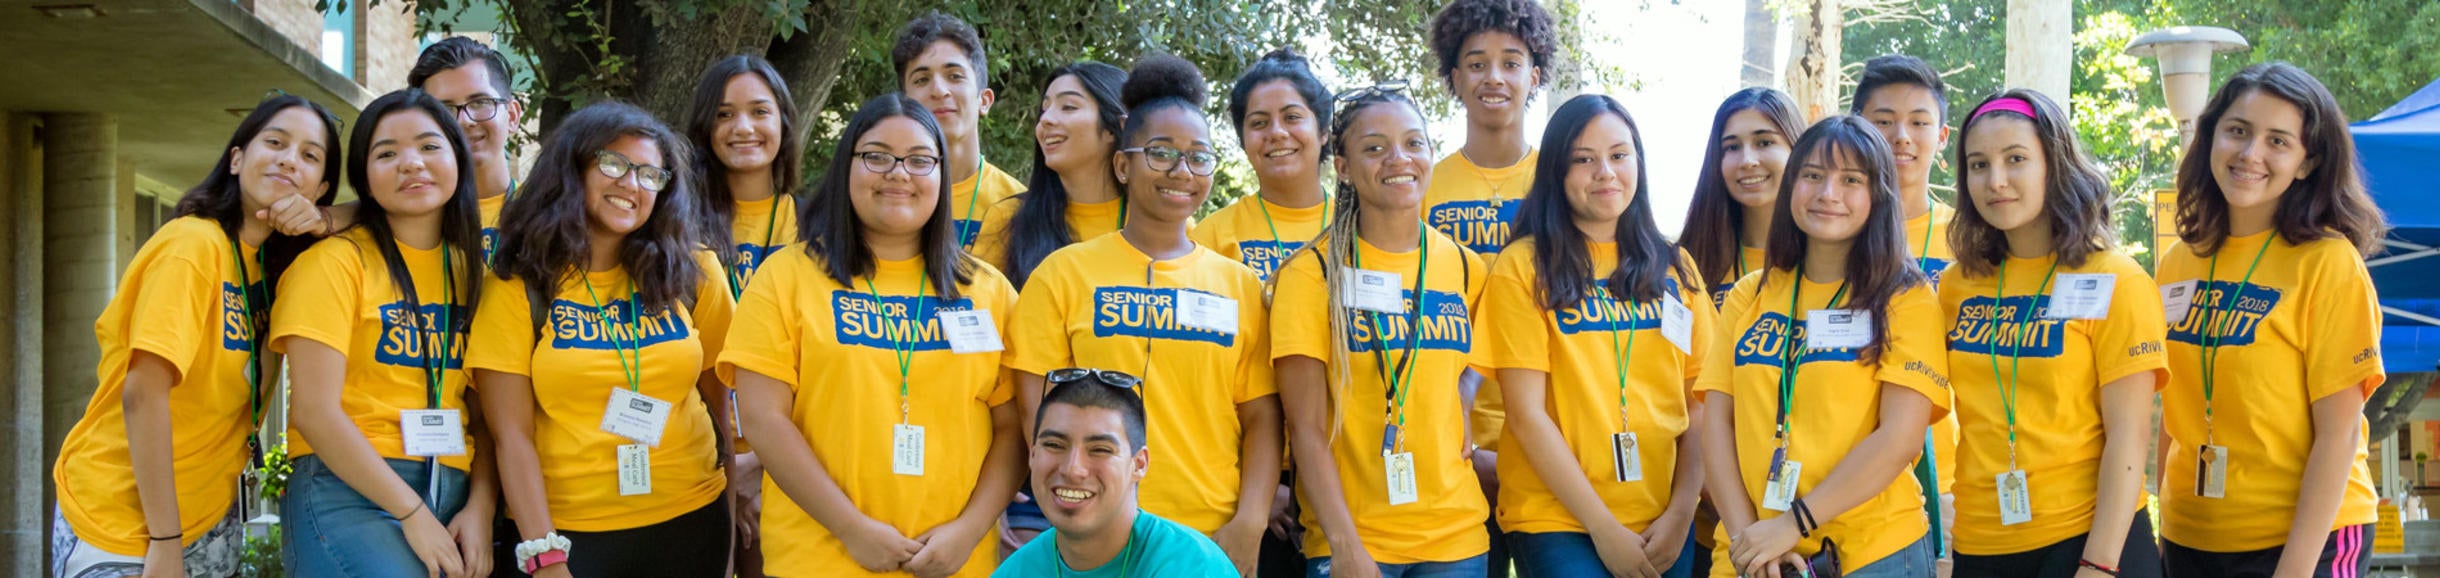 Participants in the EAOP at UC Riverside Senior Summit pose together on the UCR campus.